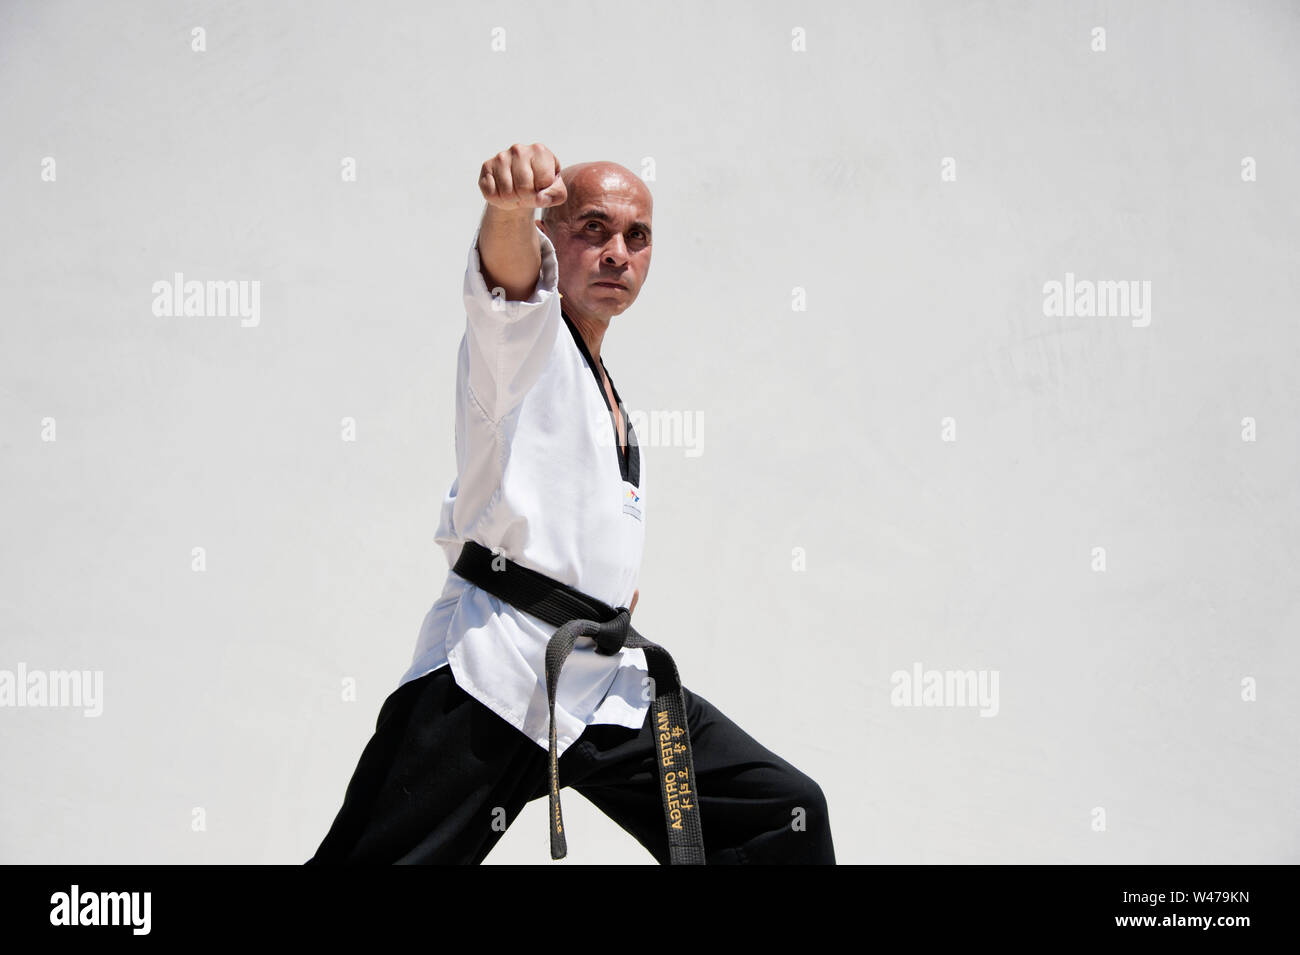 Black belt Sensei martial arts instructor demonstrating Taekwondo form. He is a master and instructor as designated by his uniform and form. Stock Photo